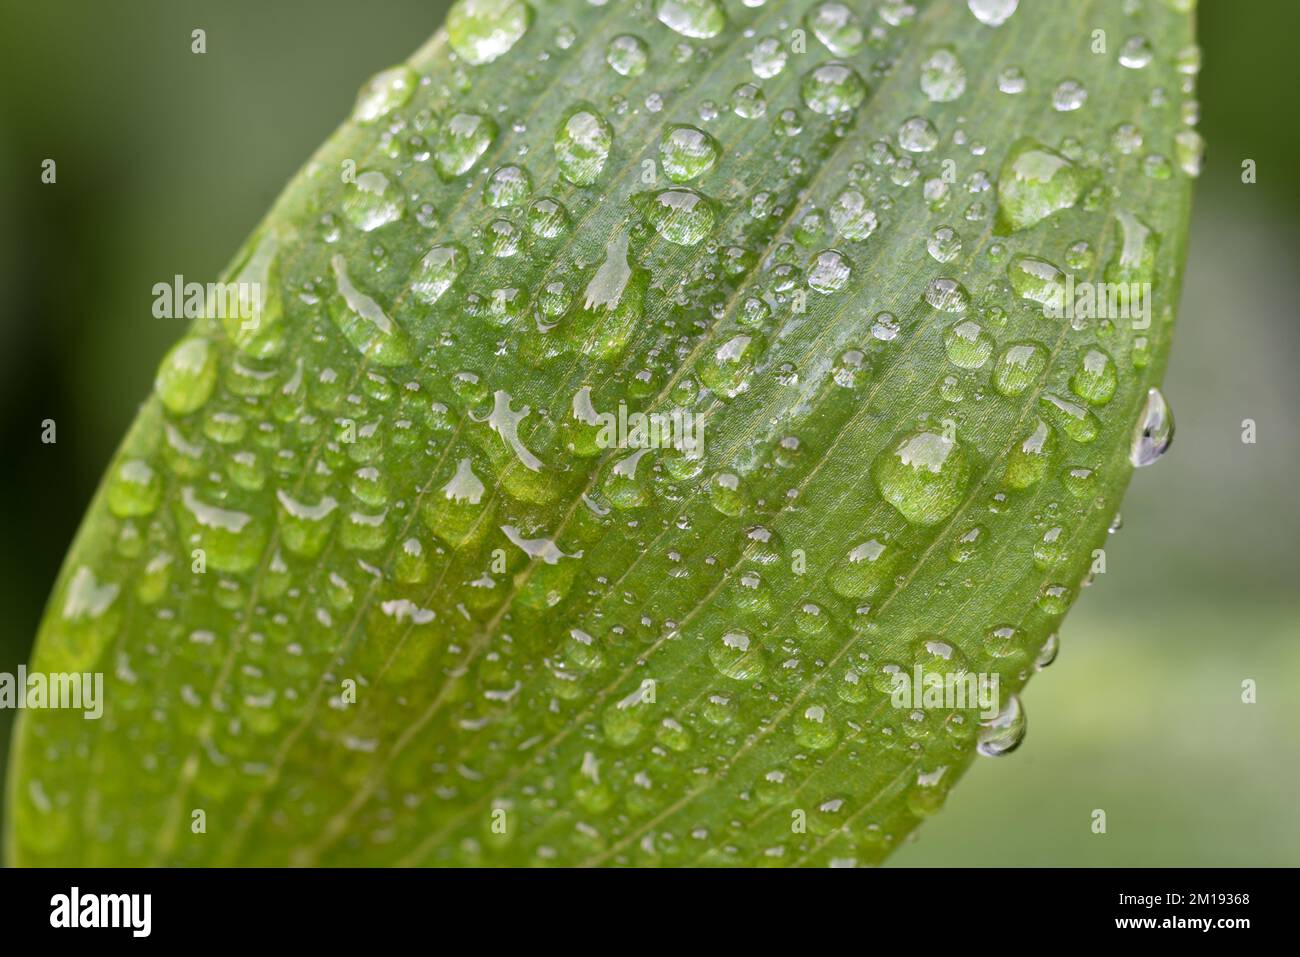 Frosty morning droplets on the leaf of an Alstroemeria plant Stock Photo